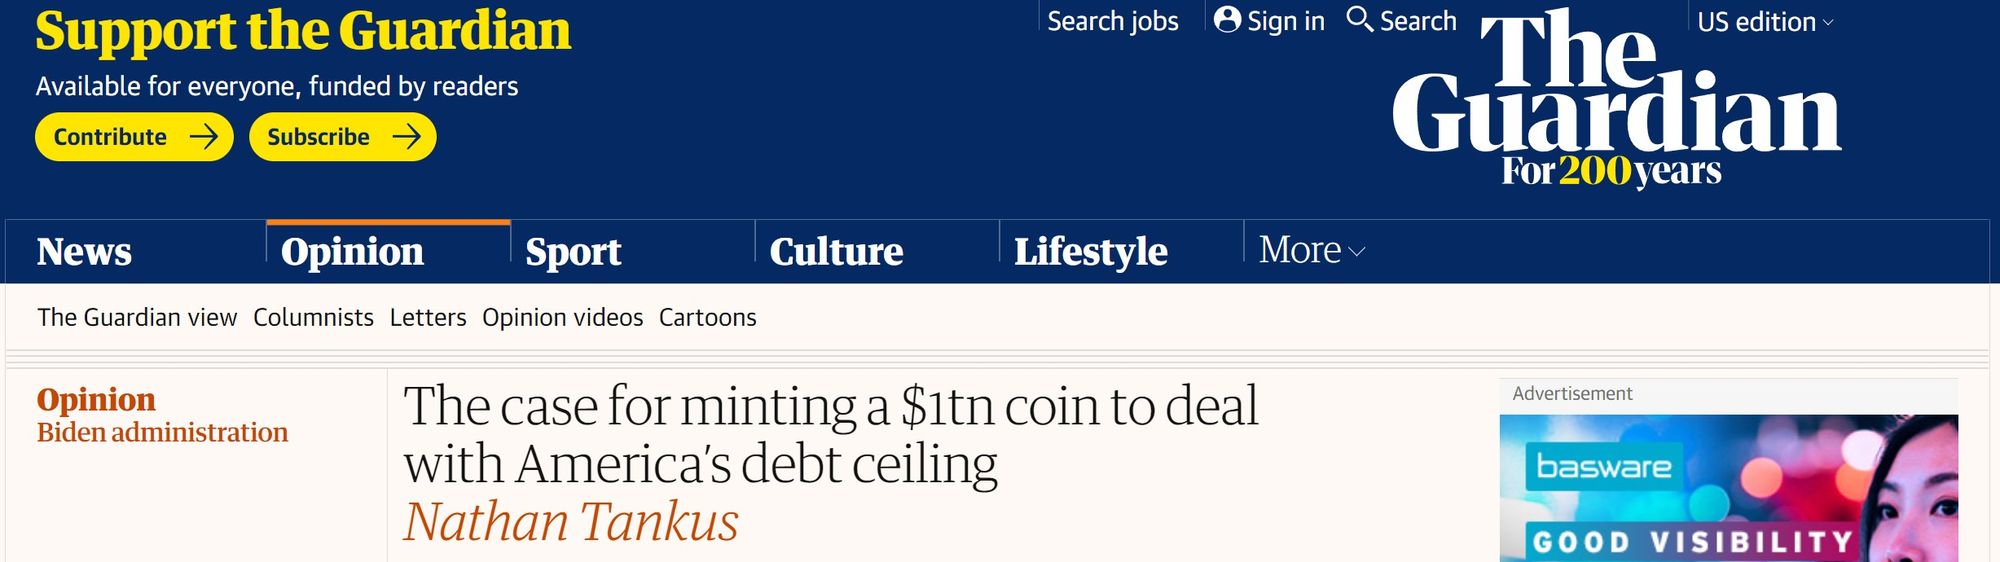 New Guardian Op Ed: The case for minting a $1tn coin to deal with America’s debt ceiling